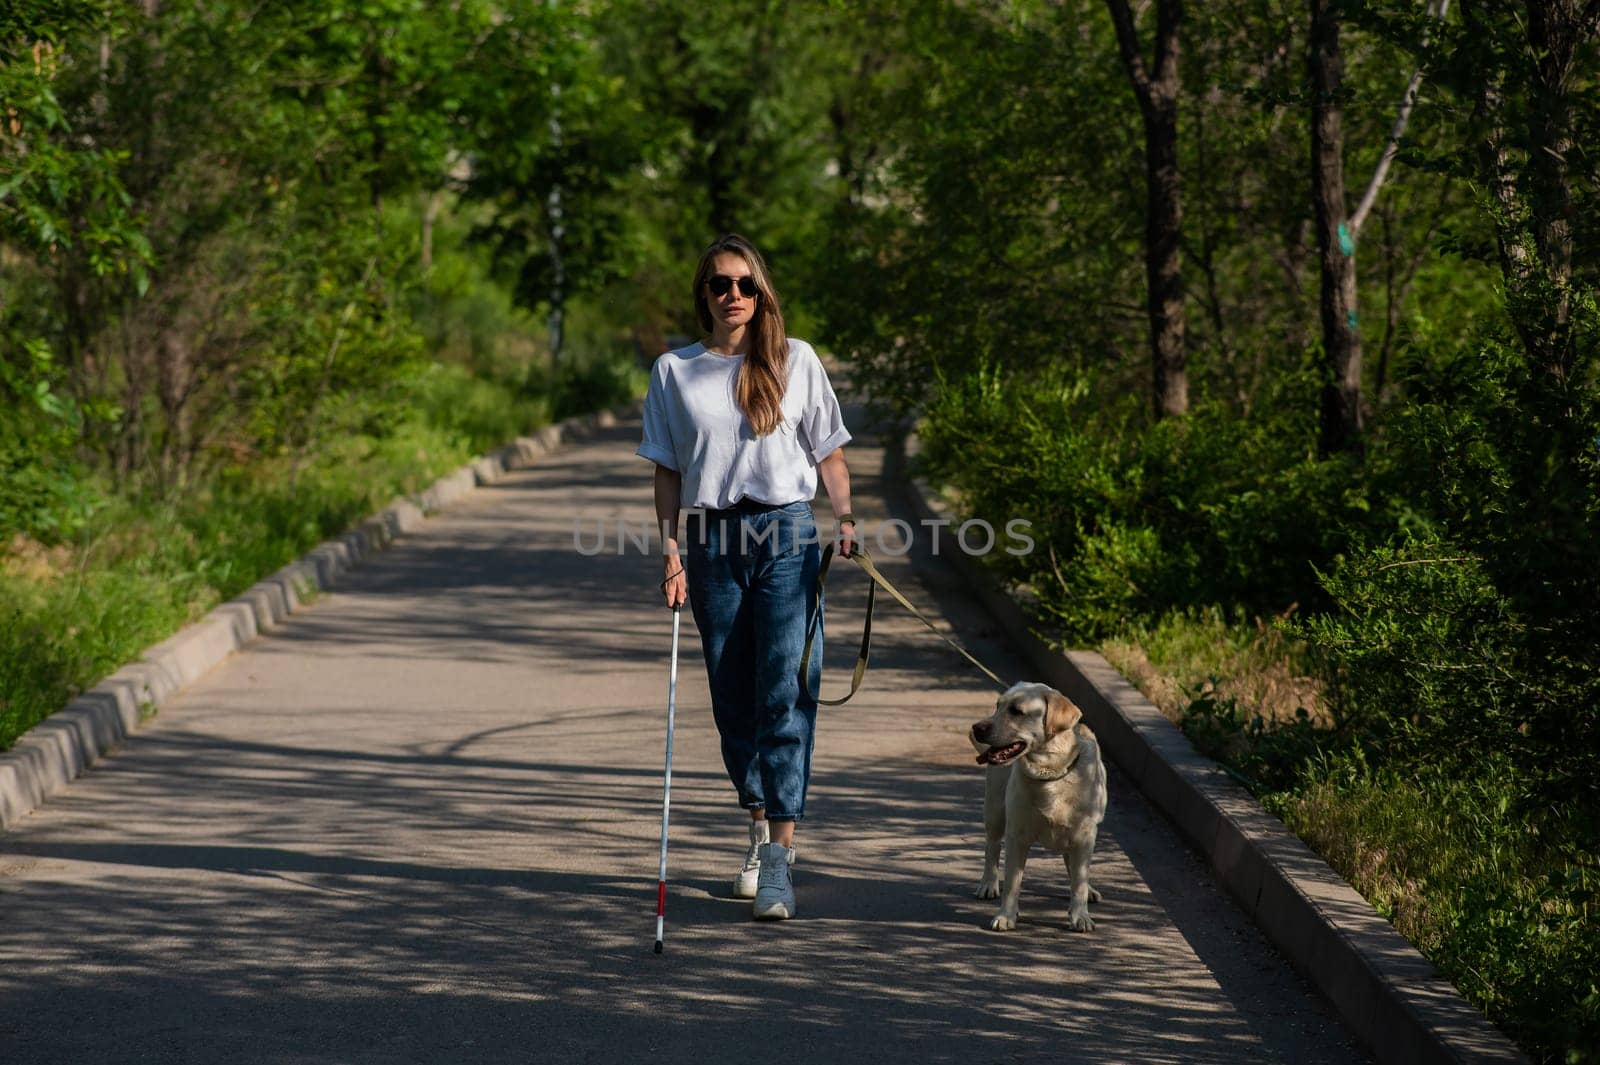 Blind woman walking with guide dog in the park. by mrwed54